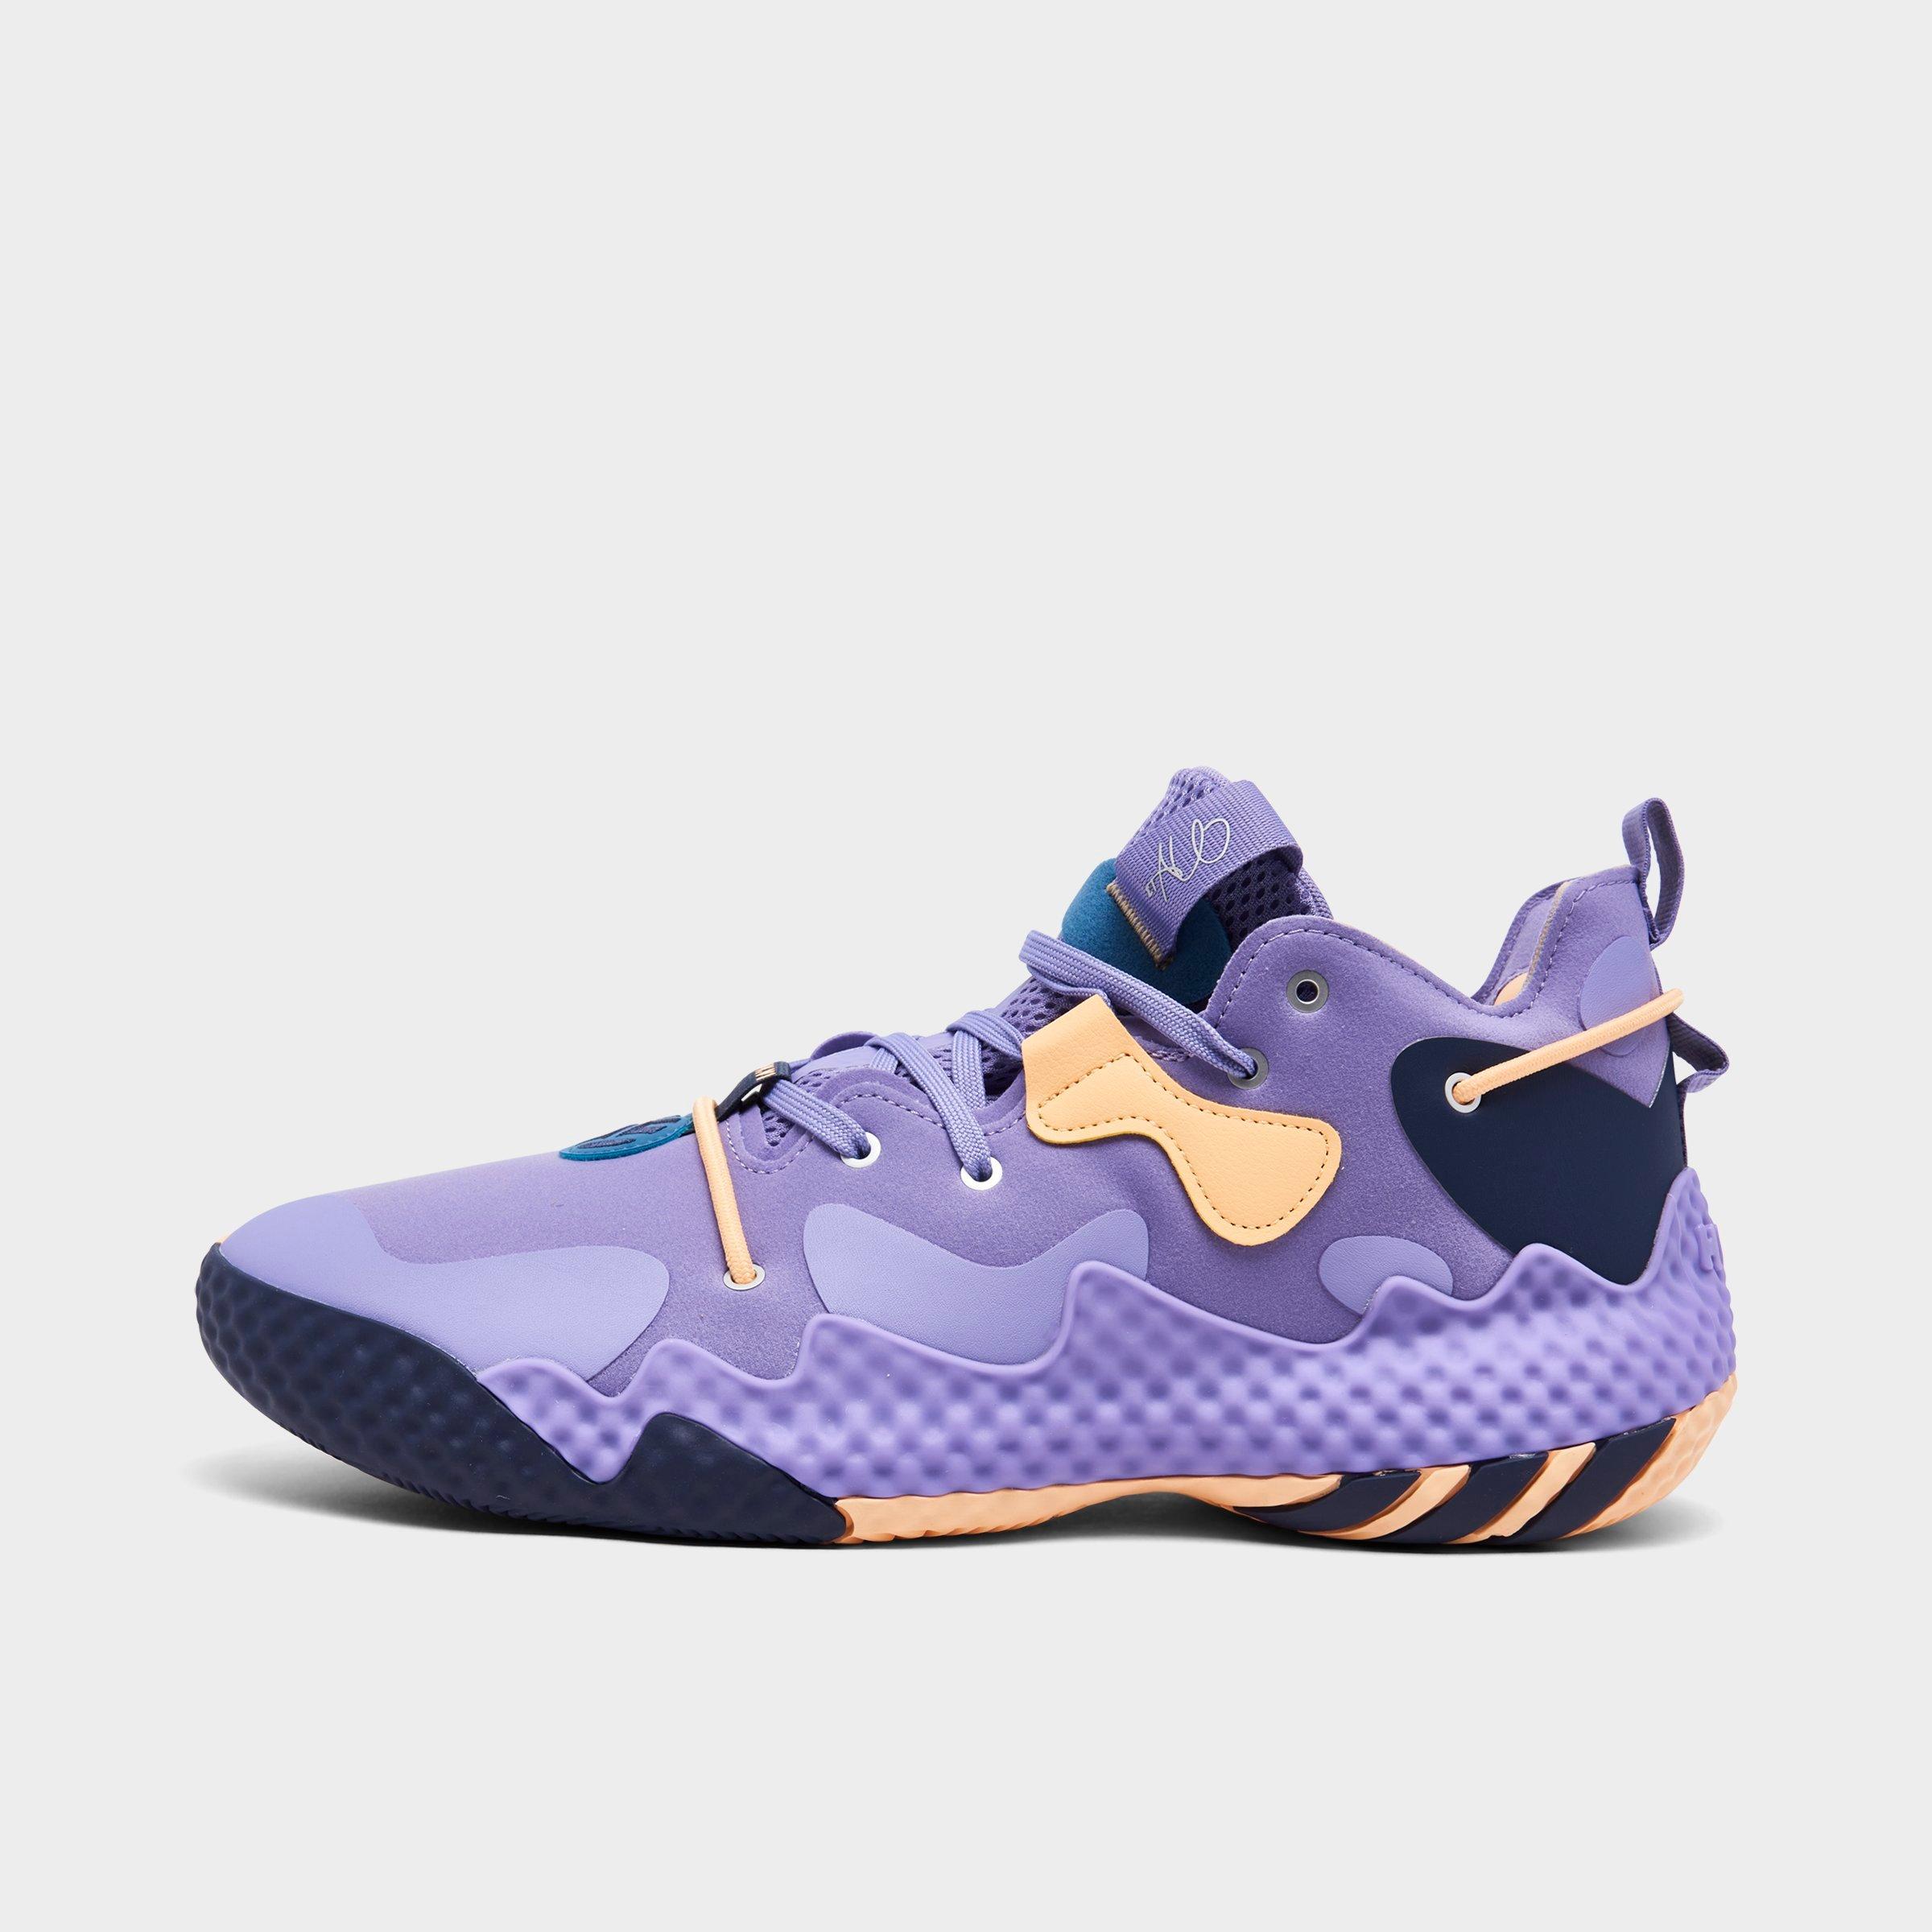 UPC 195739525662 - Adidas Harden Vol. 6 Low Basketball Shoes in Purple ...